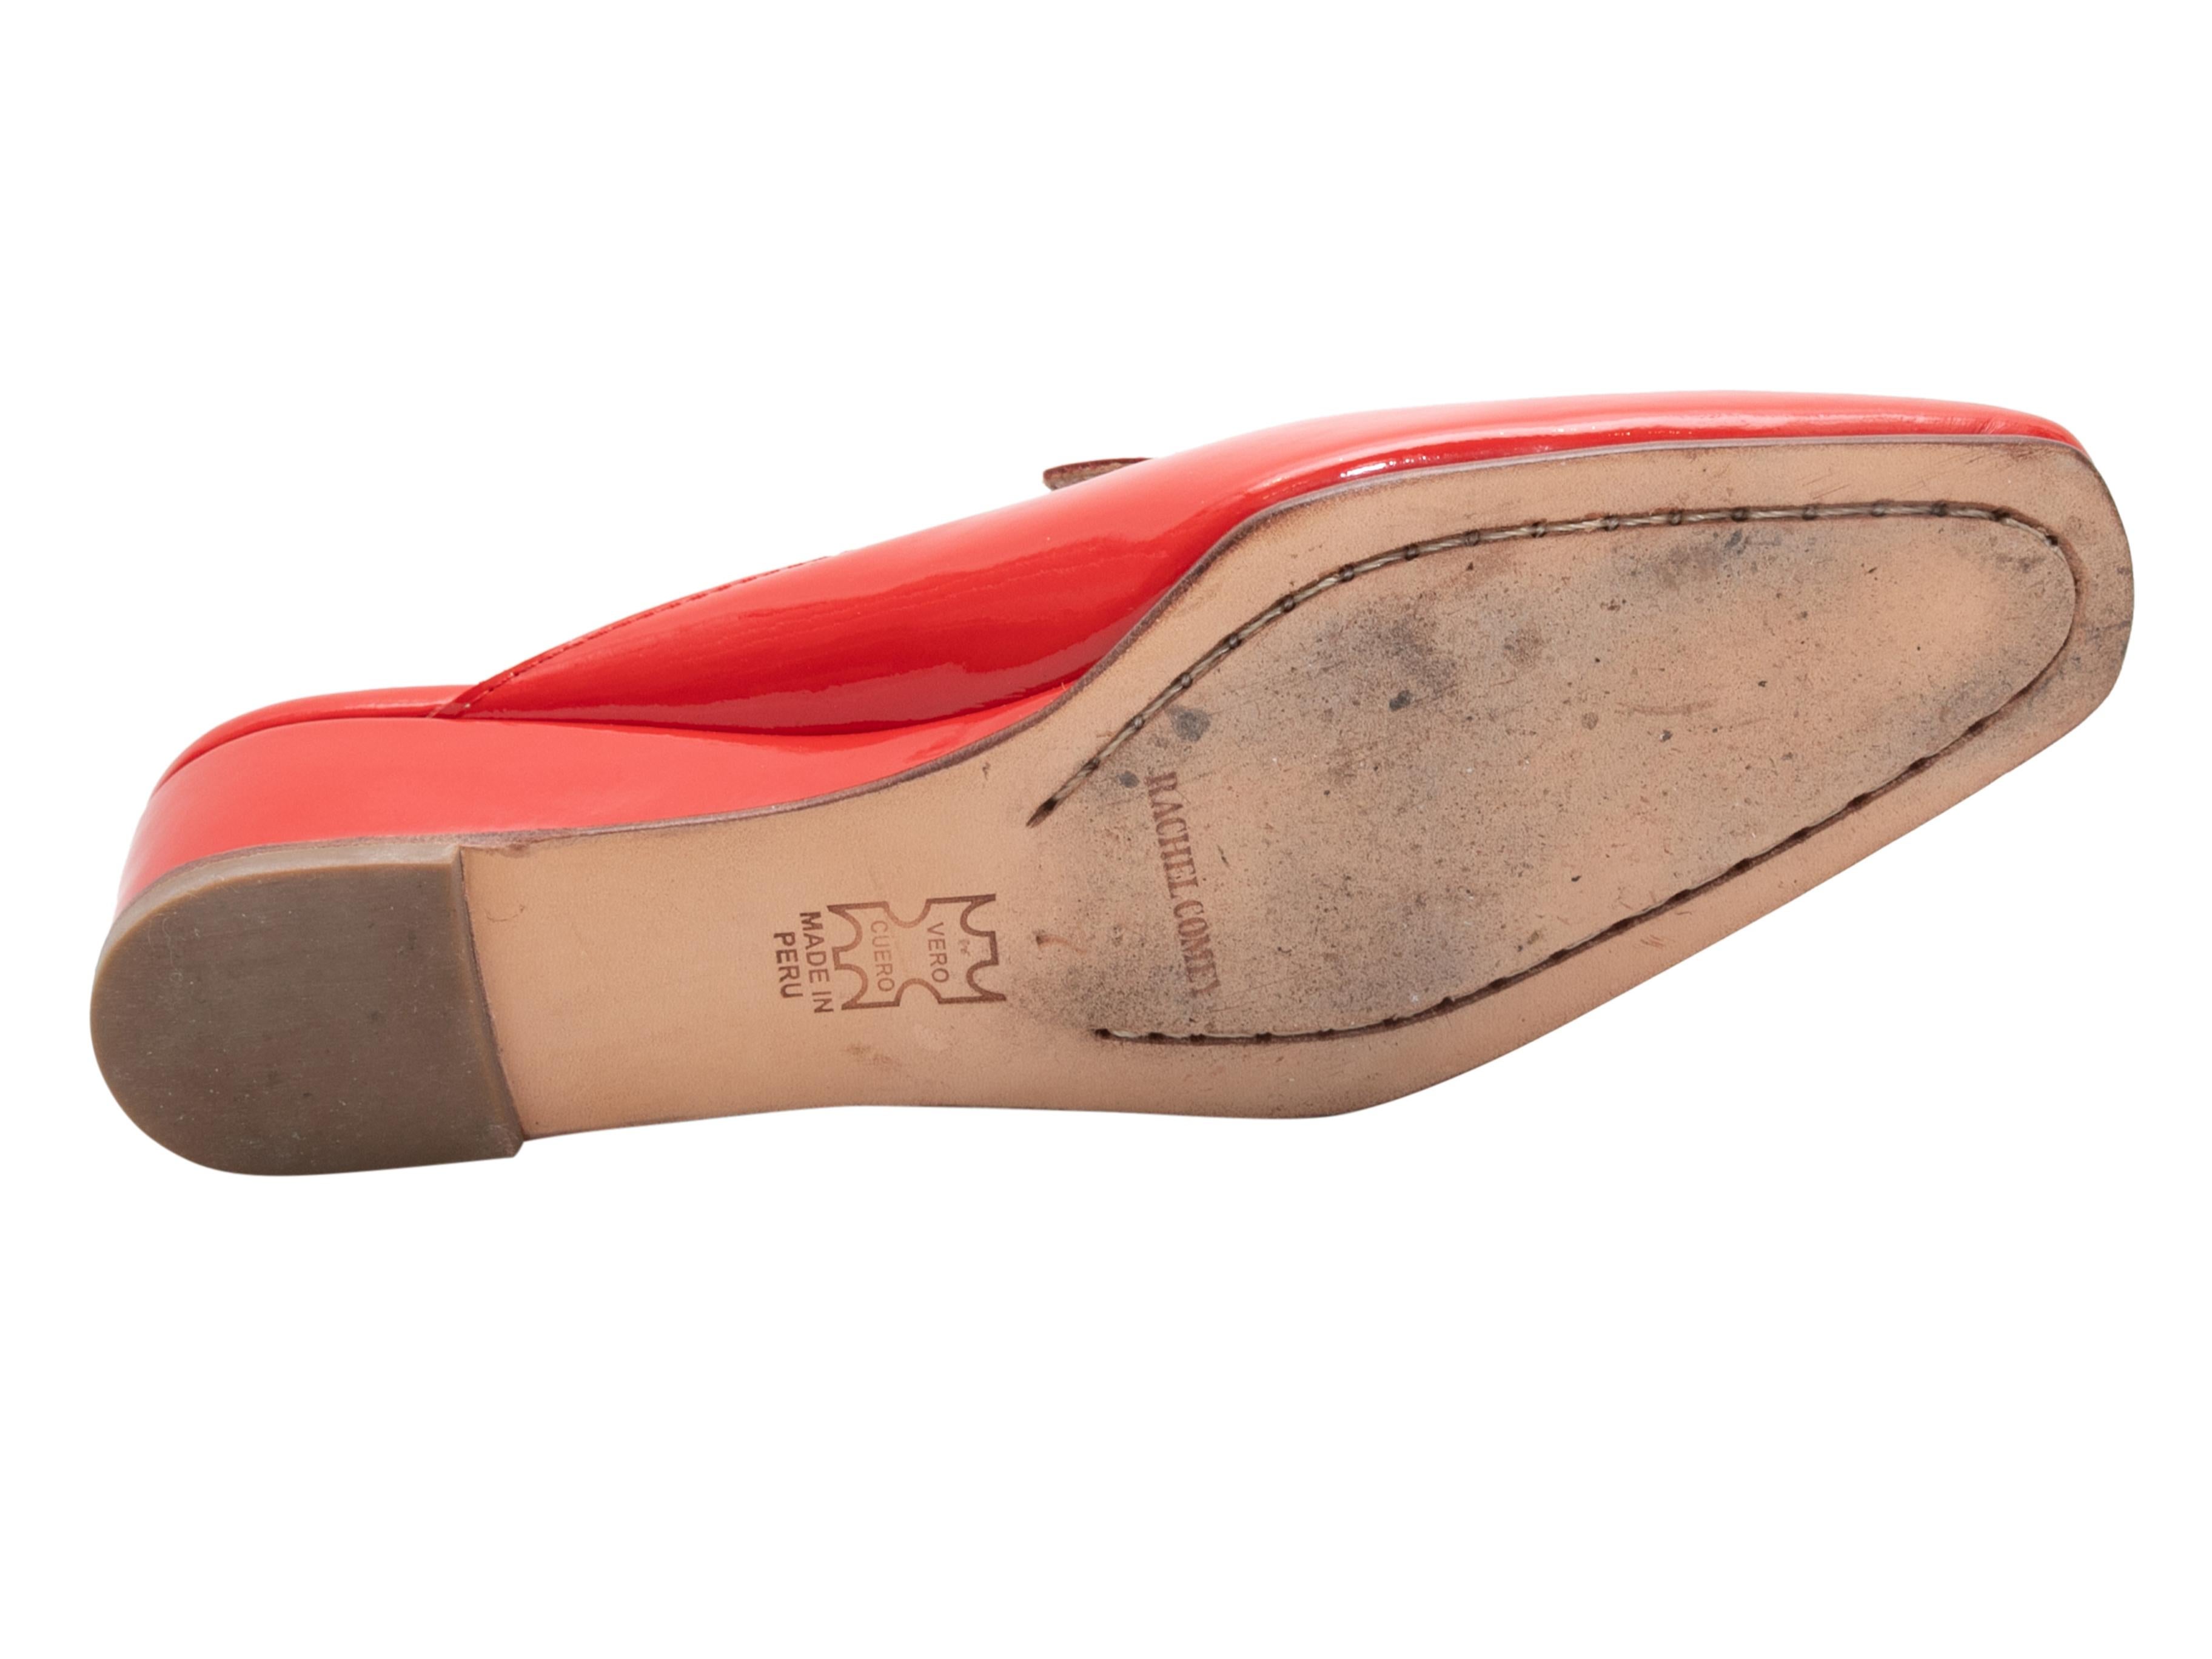 Red patent leather wedge mules by Rachel Comey. 2